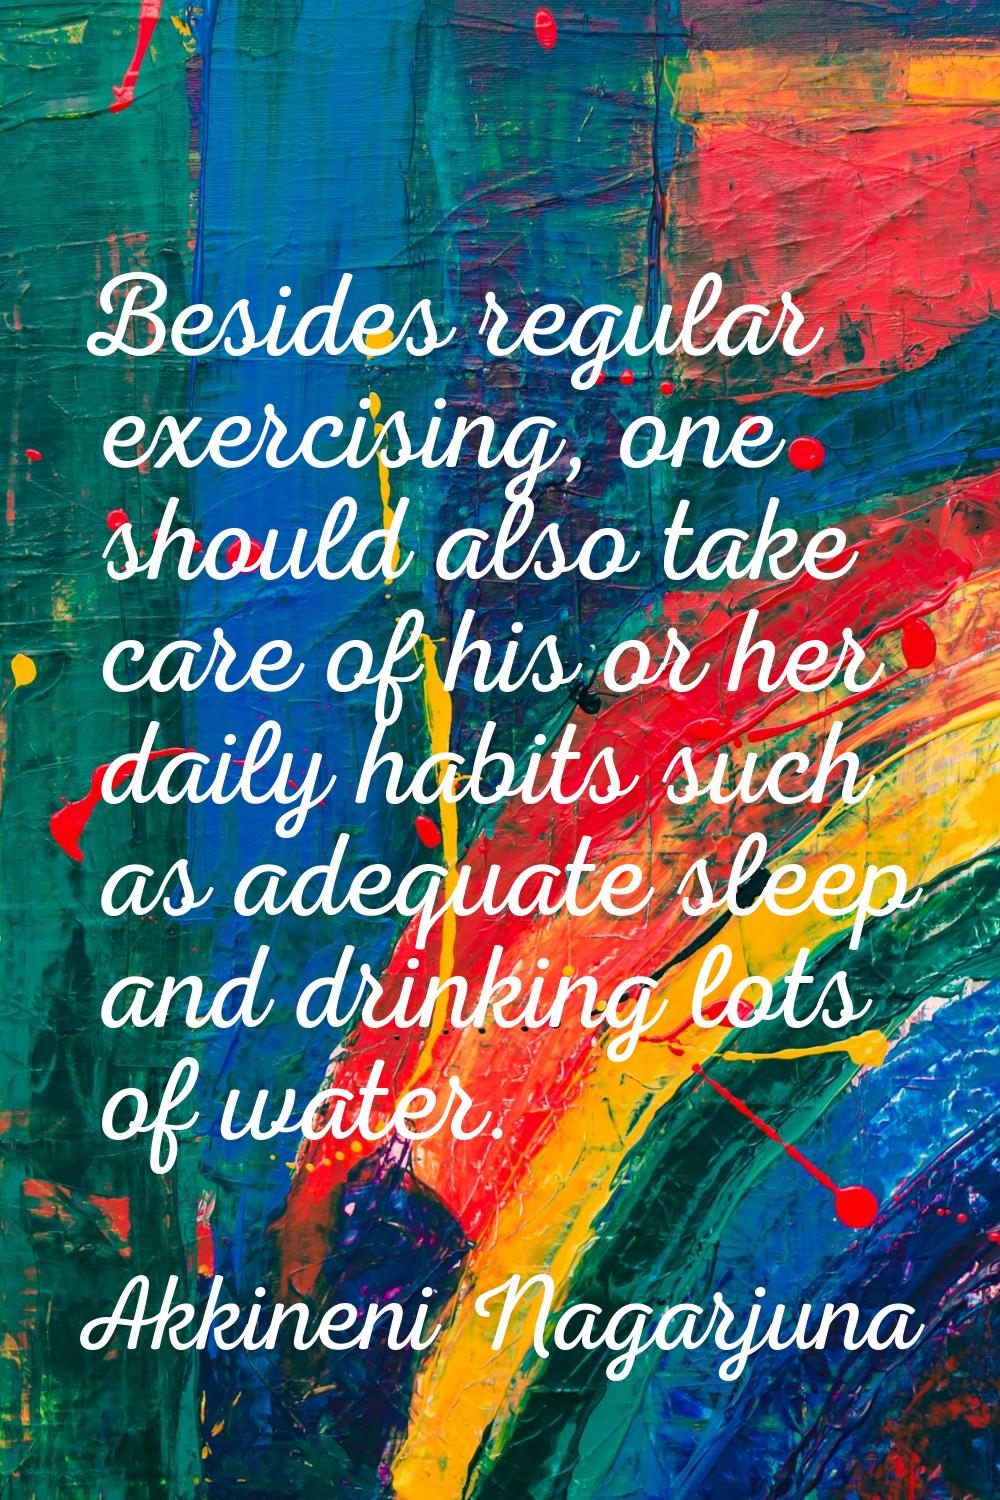 Besides regular exercising, one should also take care of his or her daily habits such as adequate s